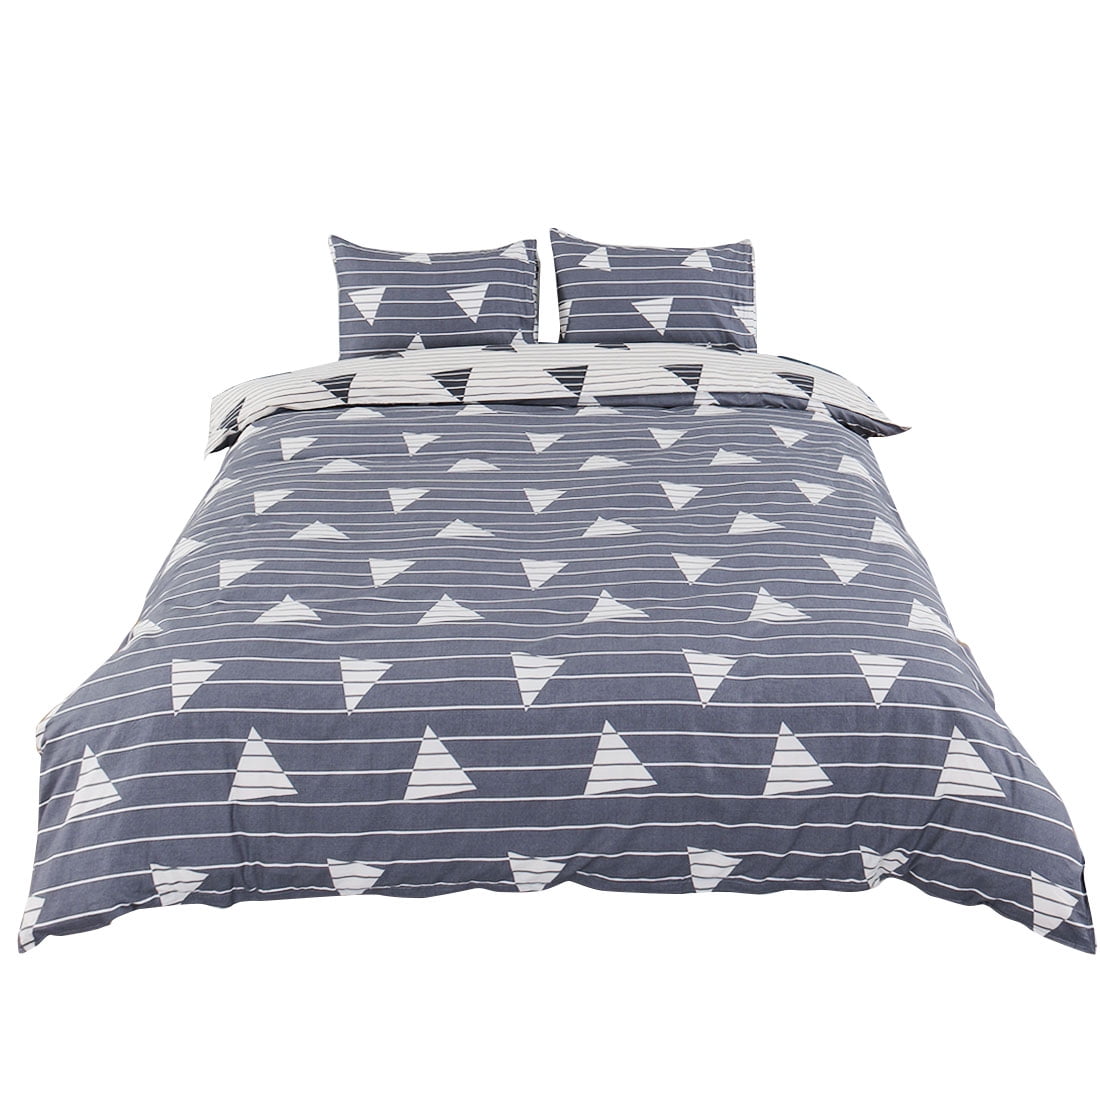 Duvet Cover Set Duvet Covers And Pillowcases Twin Size